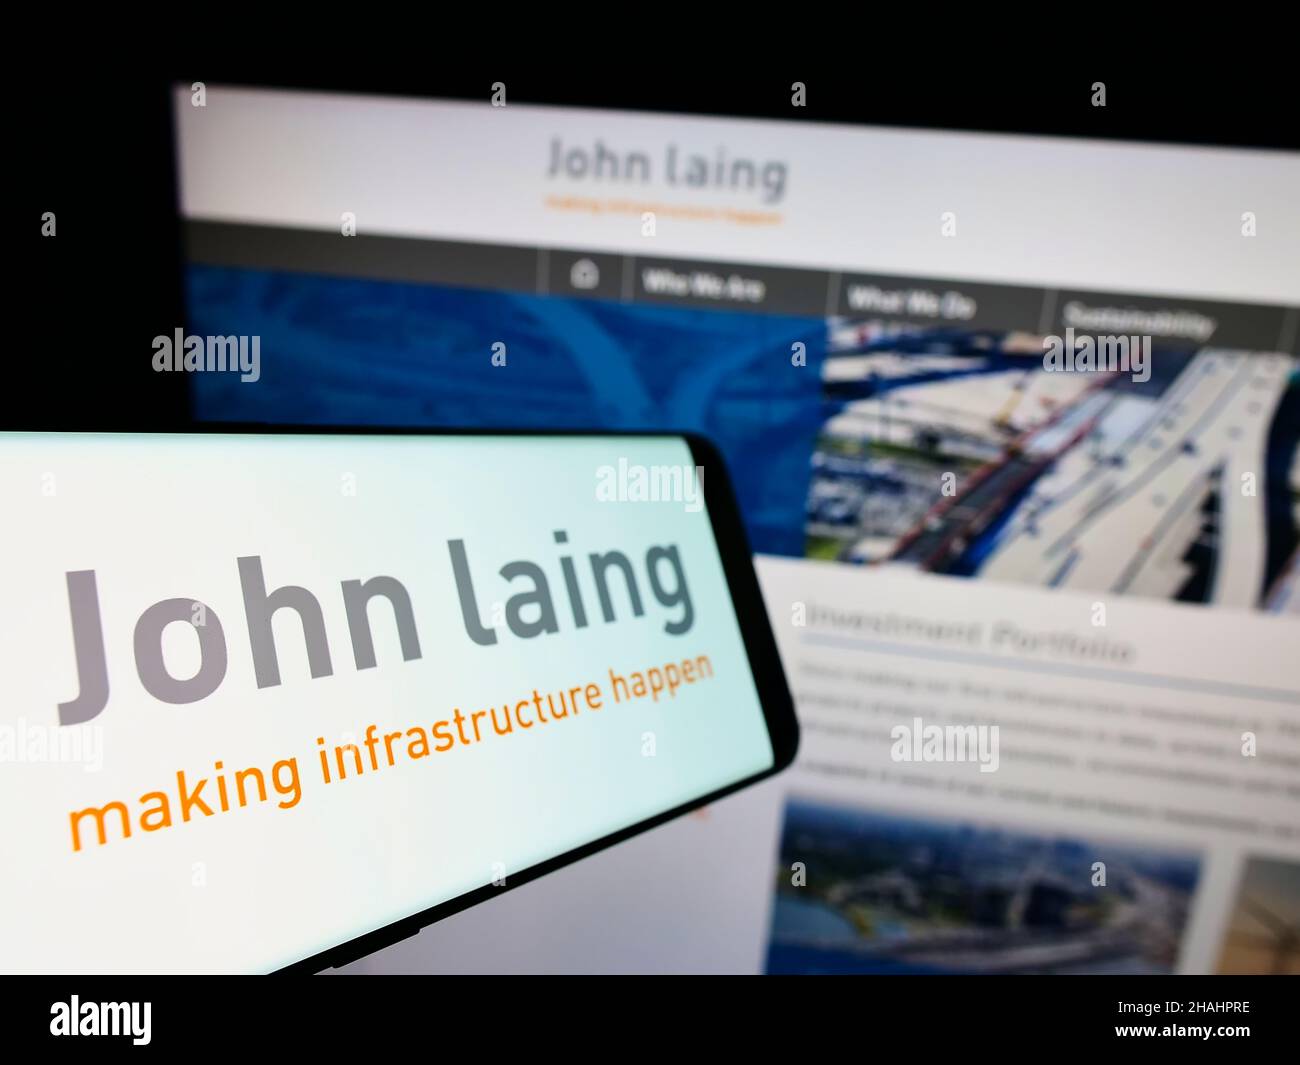 Smartphone with logo of British company John Laing Group Limited on screen in front of business website. Focus on left of phone display. Stock Photo